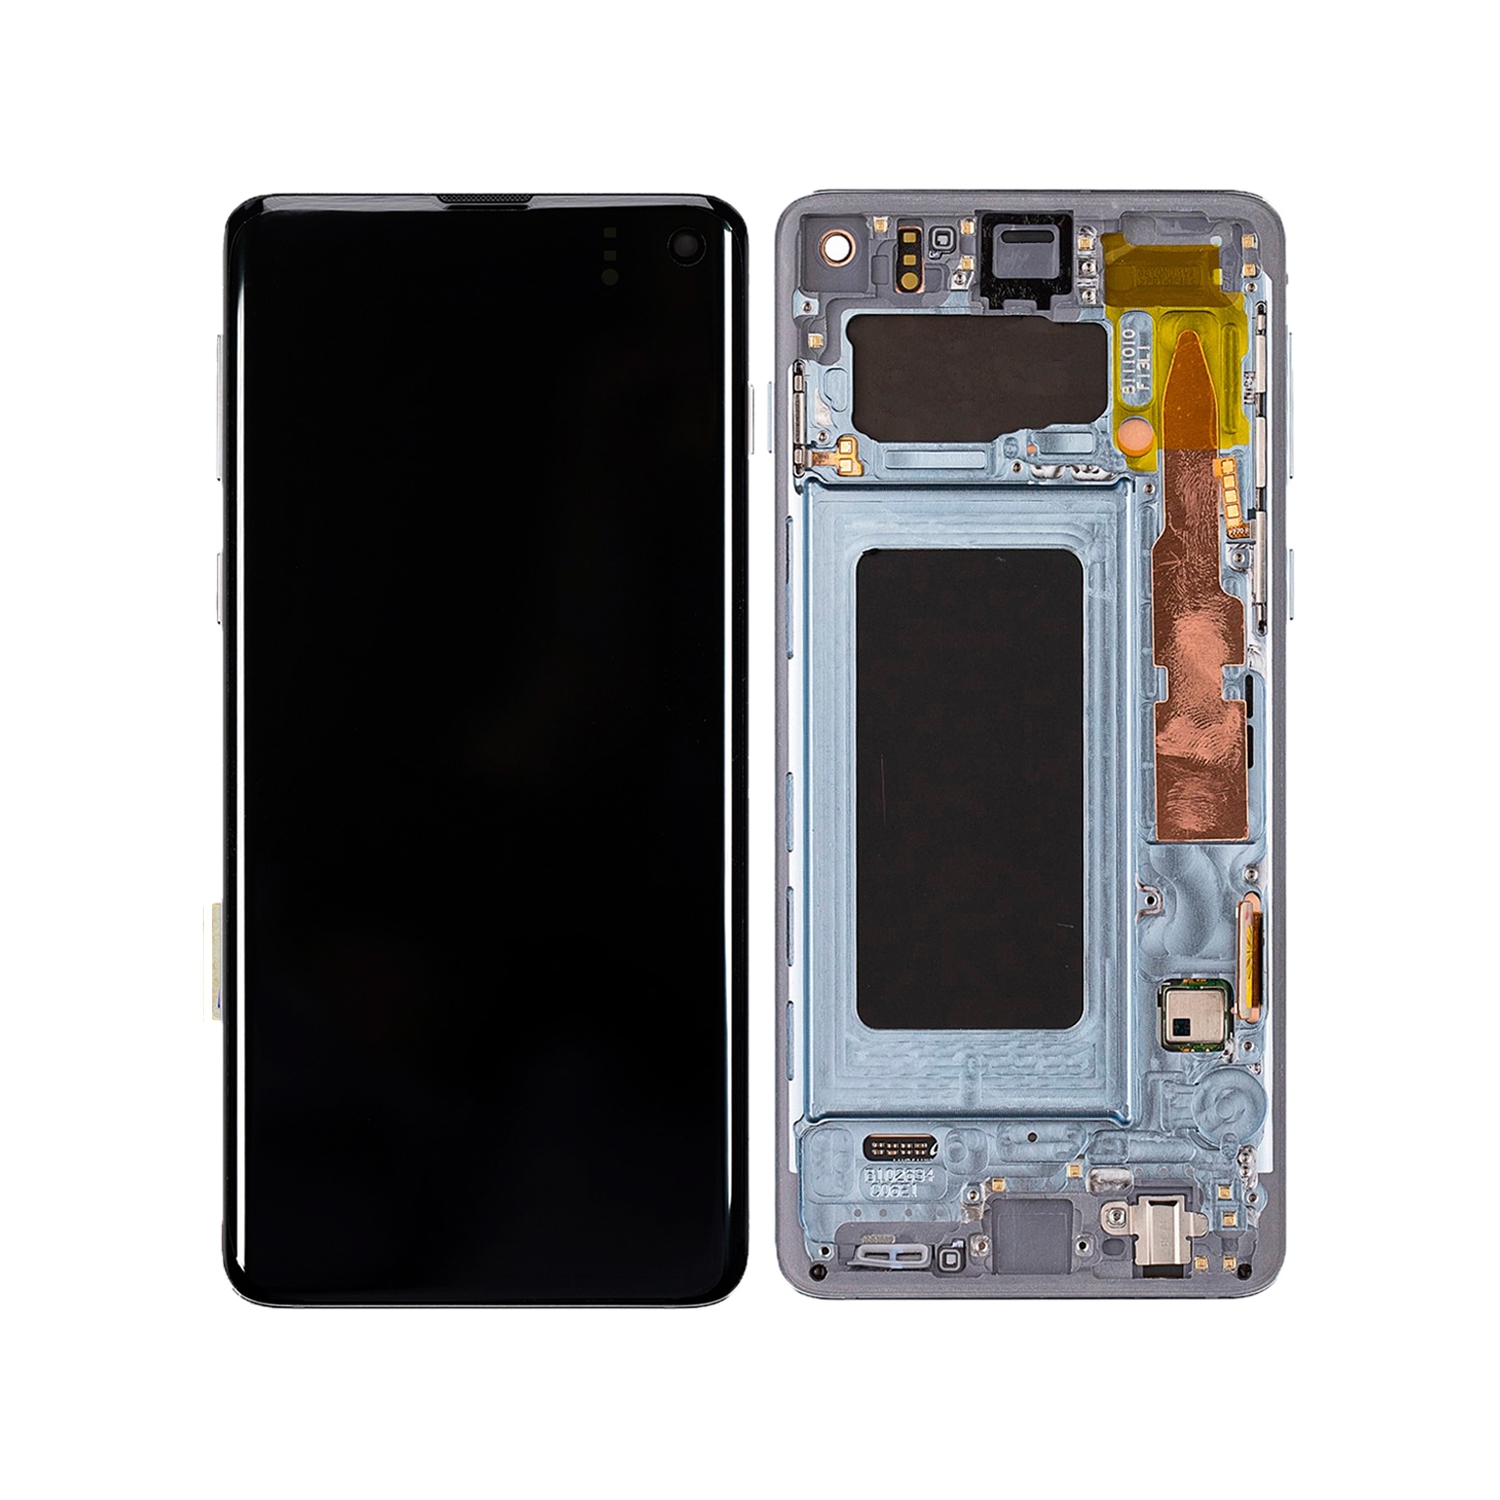 Replacement OLED Display Touch Screen Digitizer Assembly With Frame For Samsung Galaxy S10 - Prism Blue